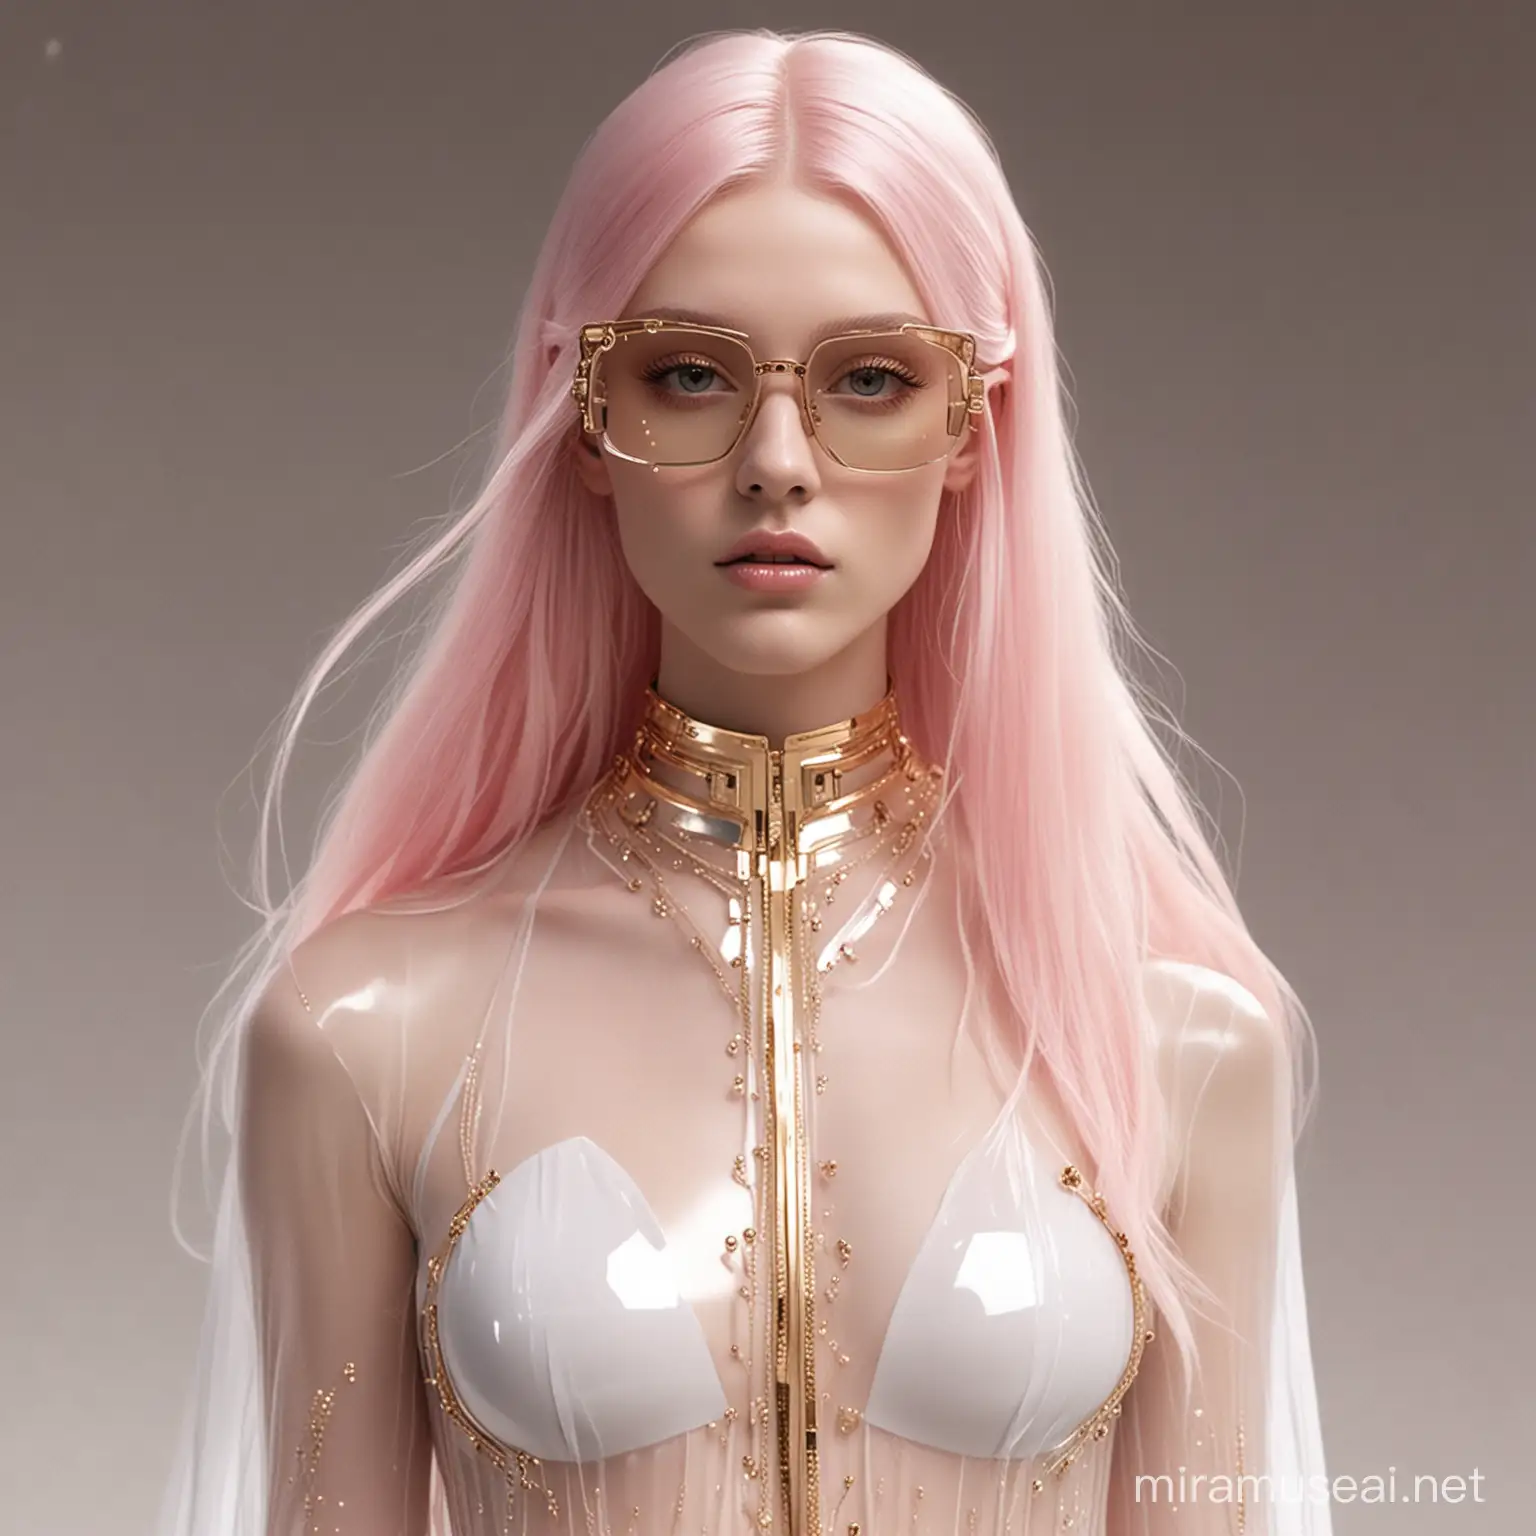 Ethereal Futuristic Goddess in GucciInspired White and Gold Attire